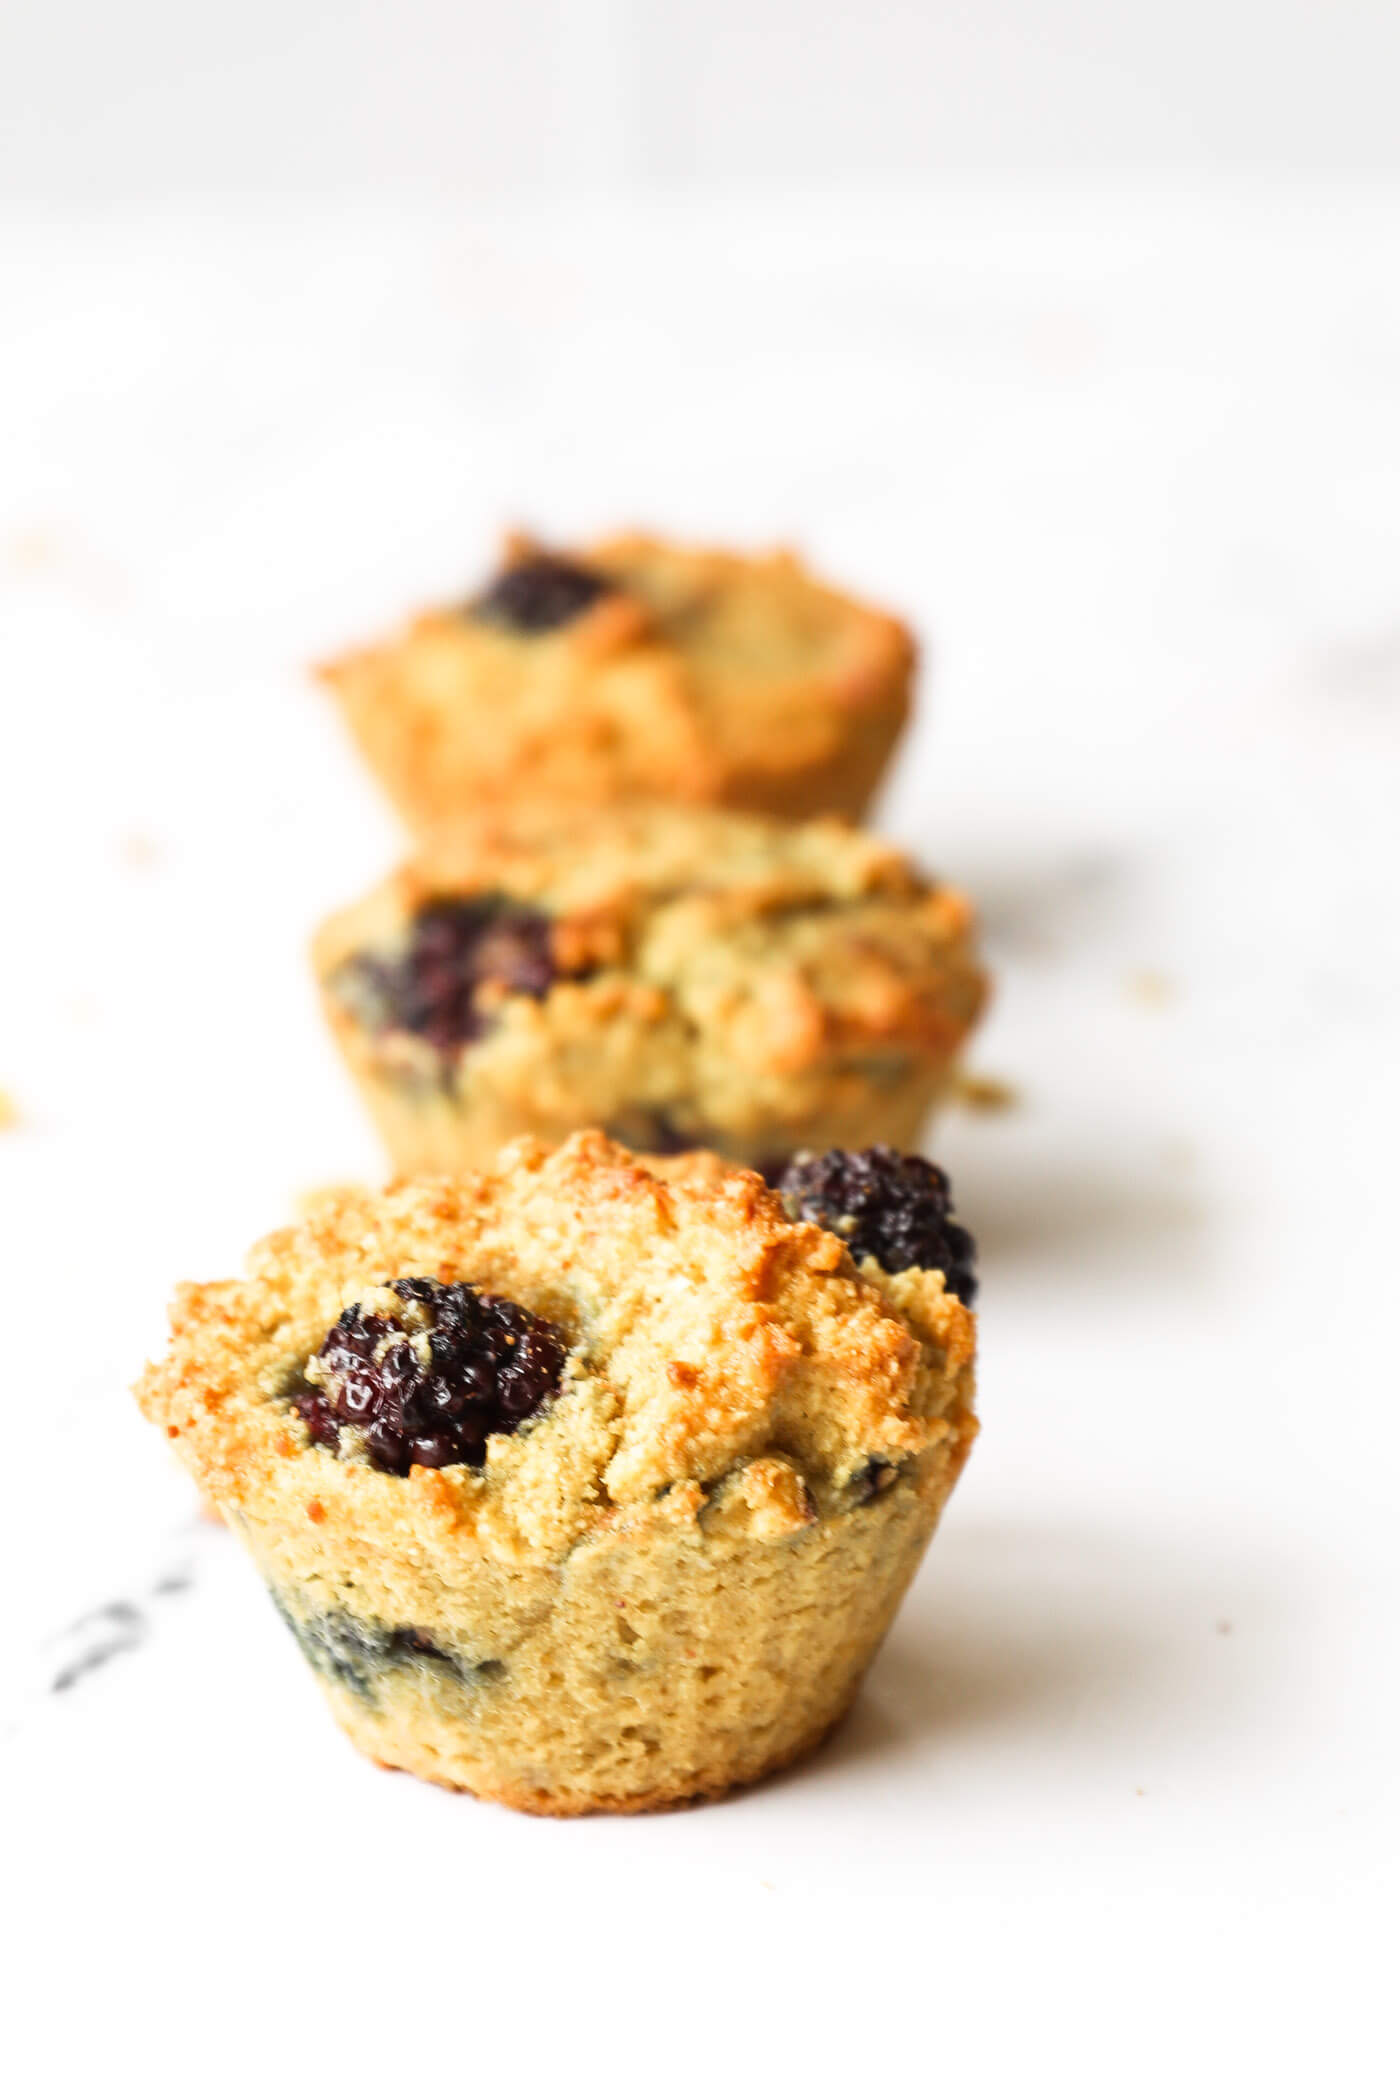 Three blackberry muffins lined up with the front muffin in focus and the other two blurry in the background.